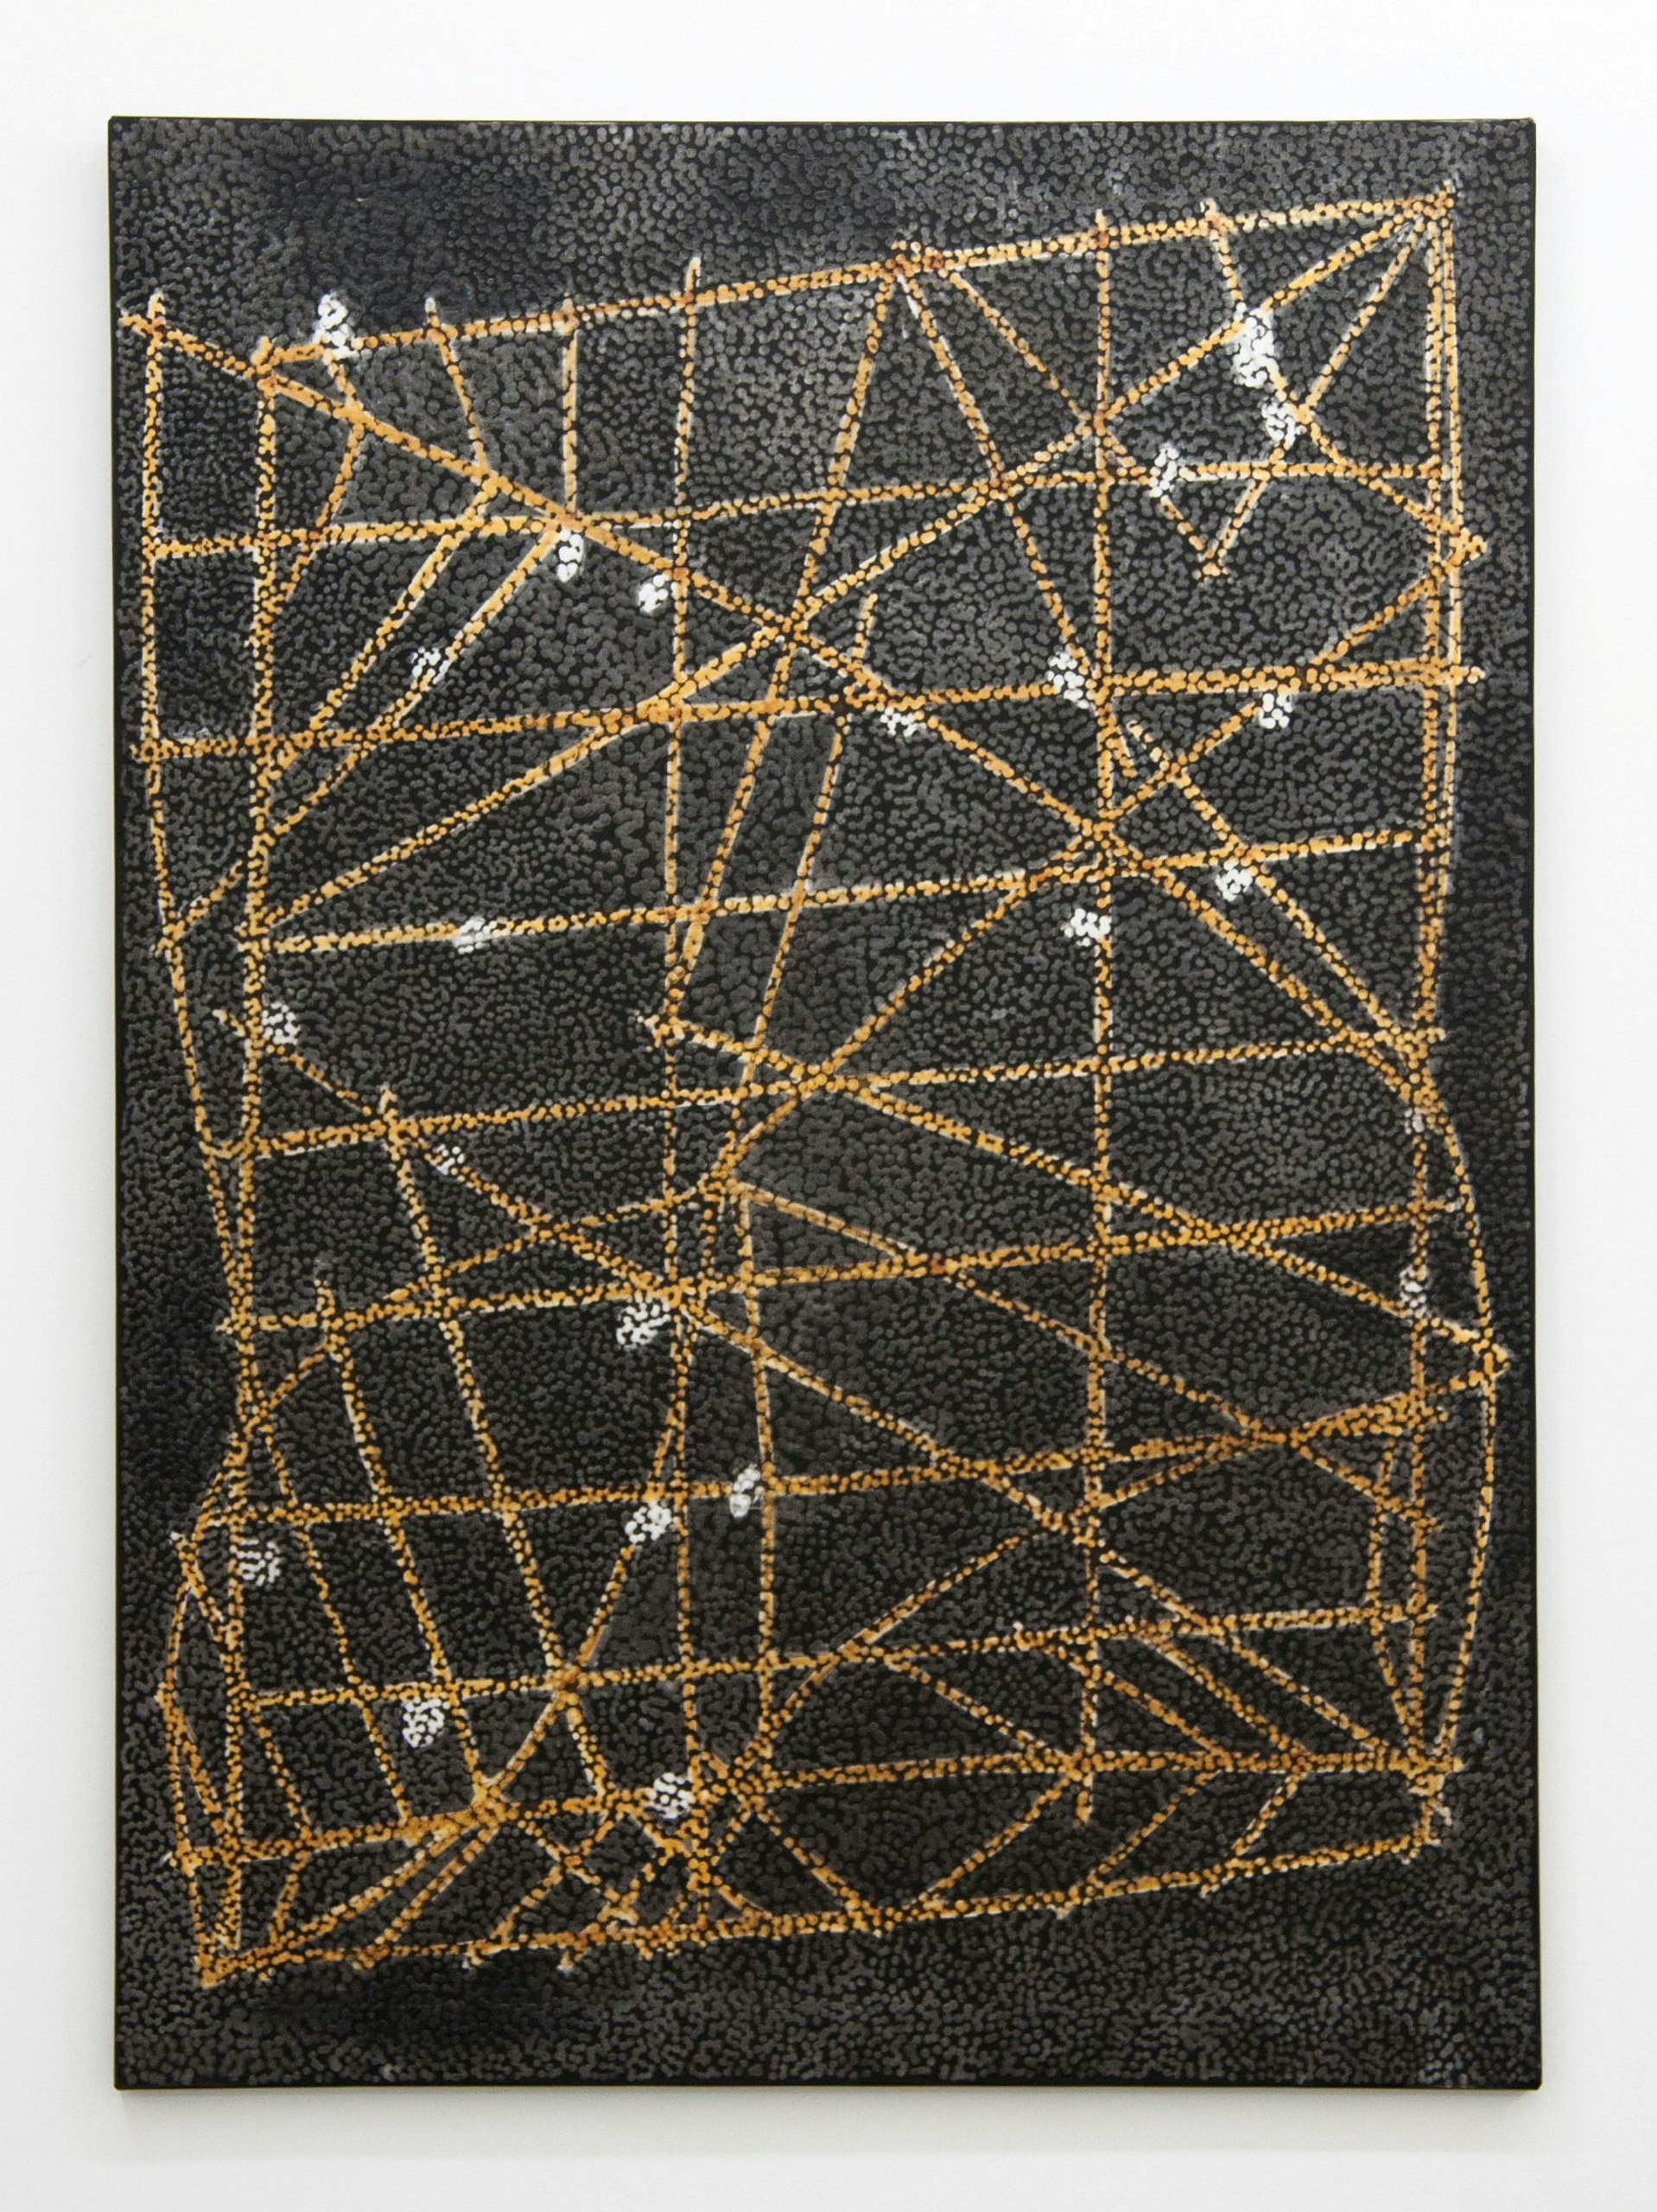 An oil painting in portrait format of a stick chart or Rebbelib, used to navigate the Great Ocean.